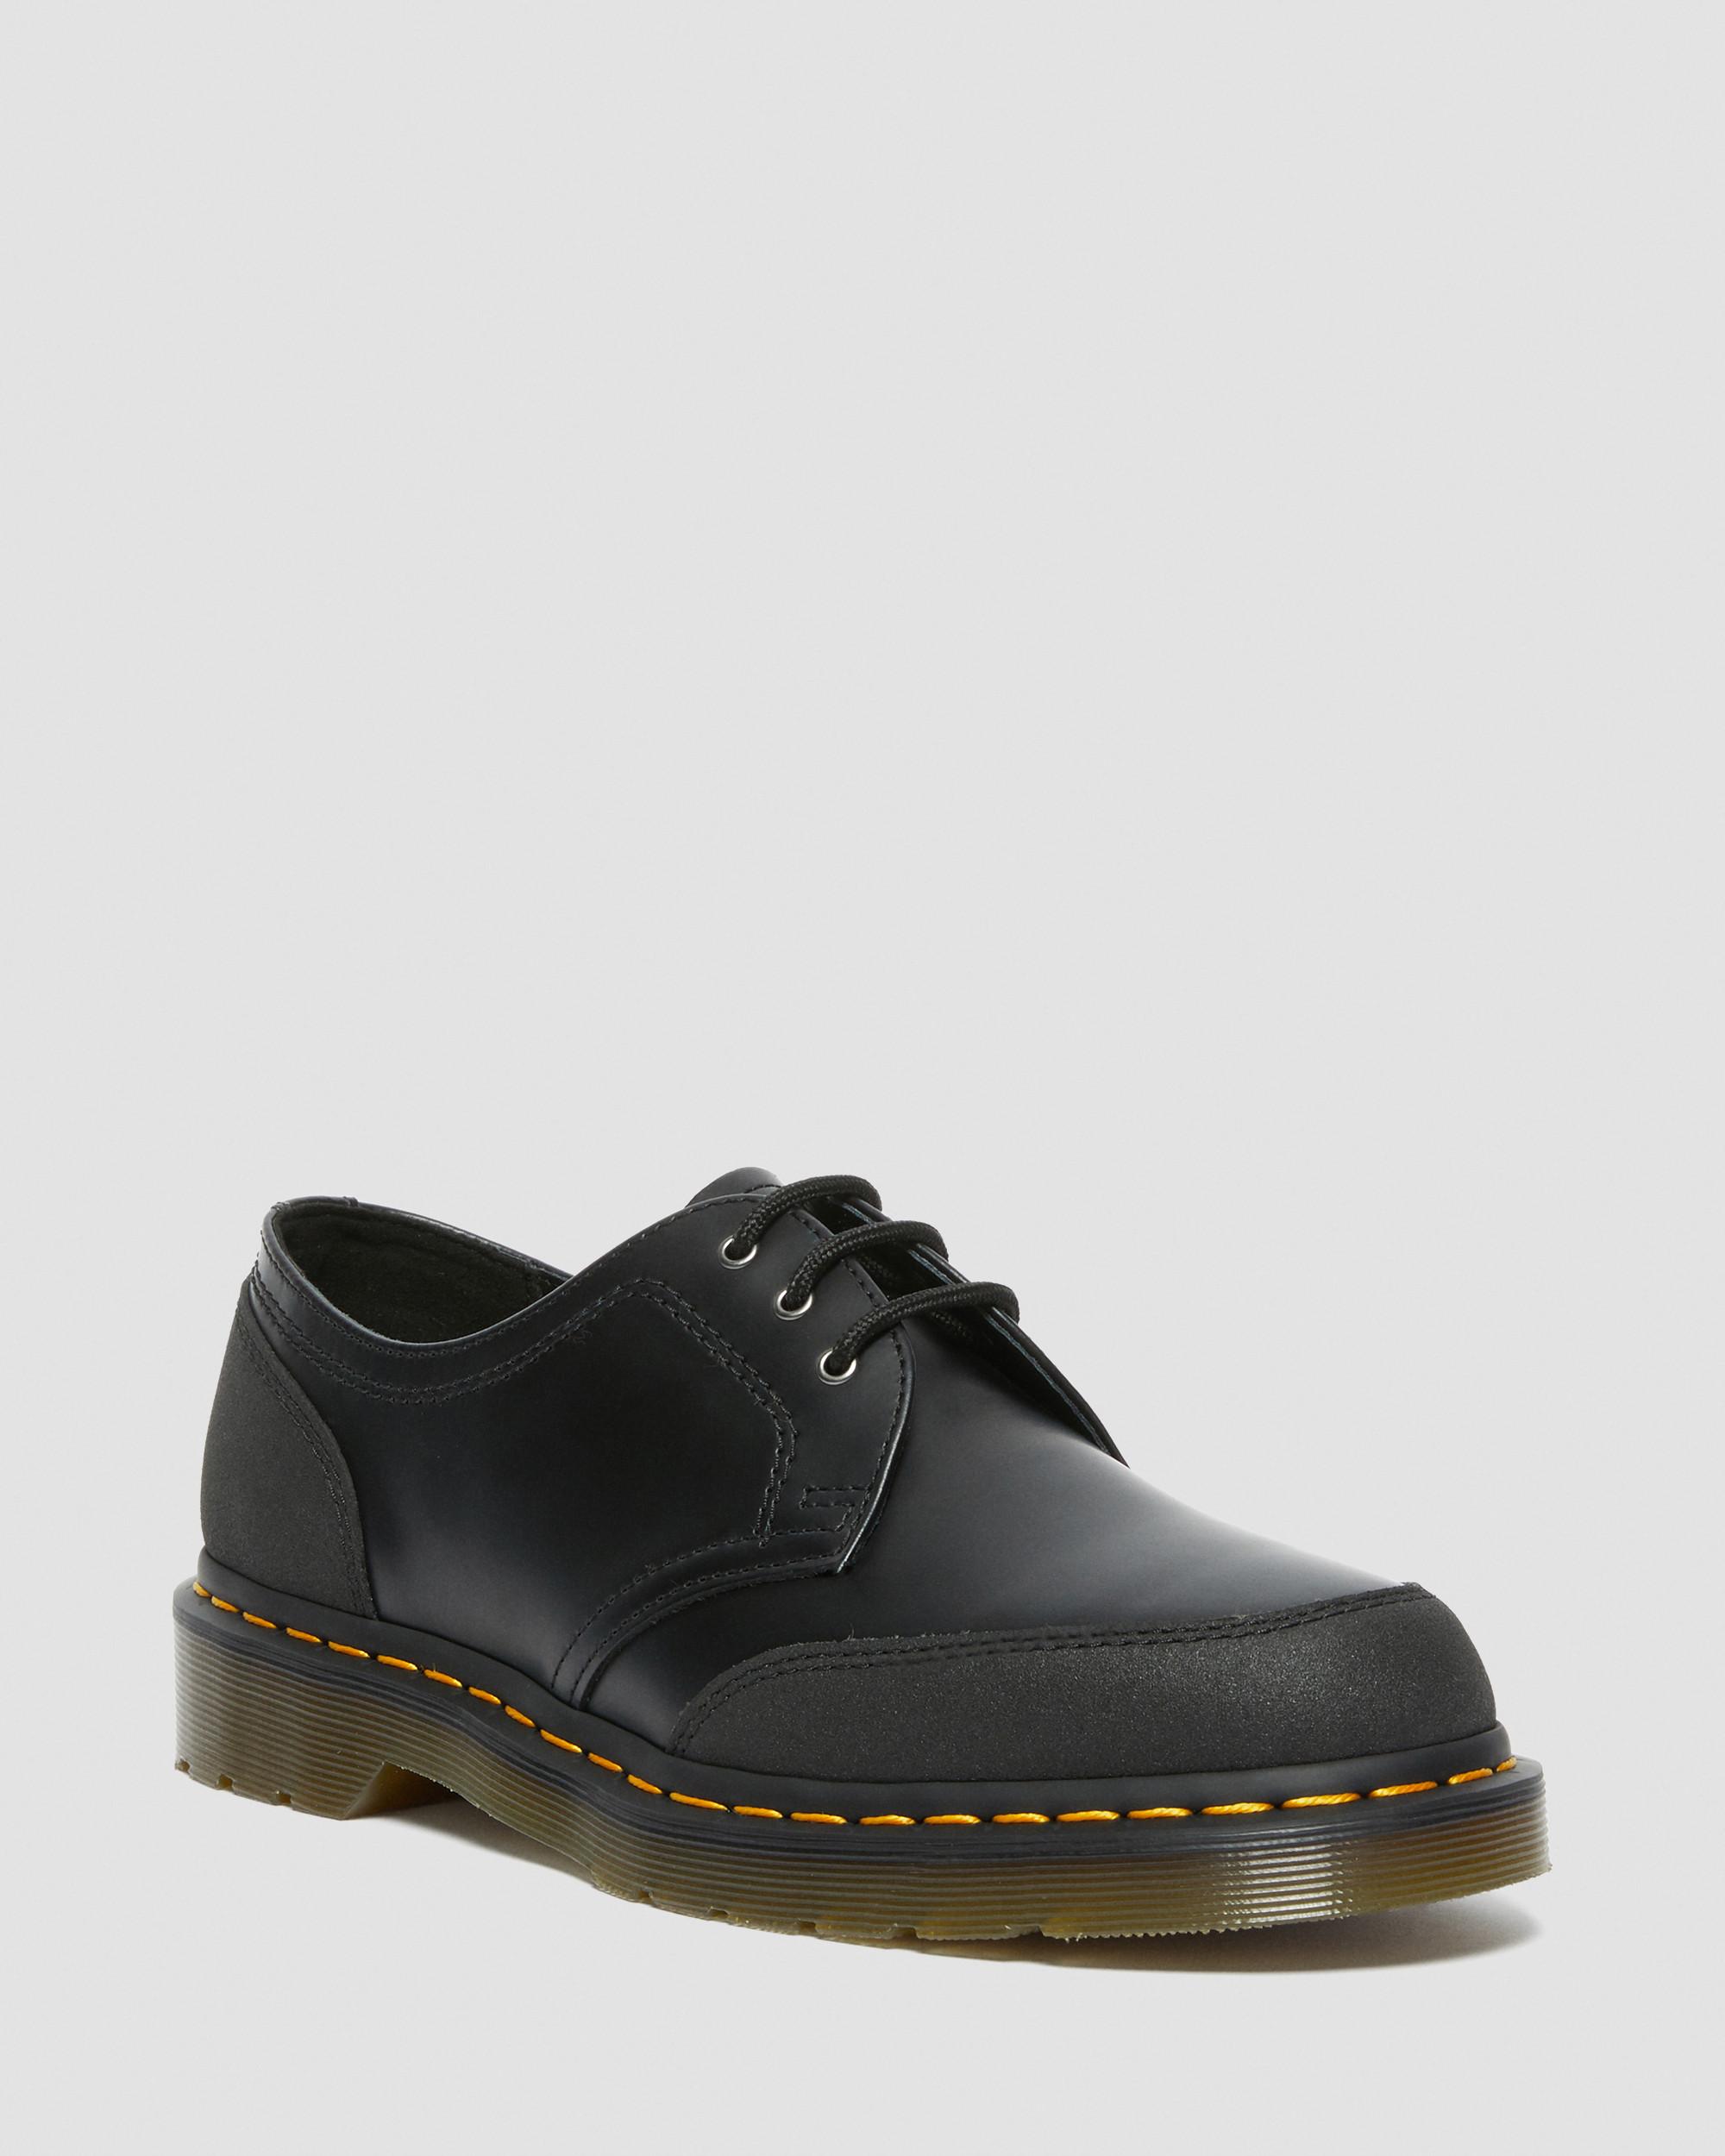 How to Style Dr. Martens 1461 Shoe | Outfit Ideas